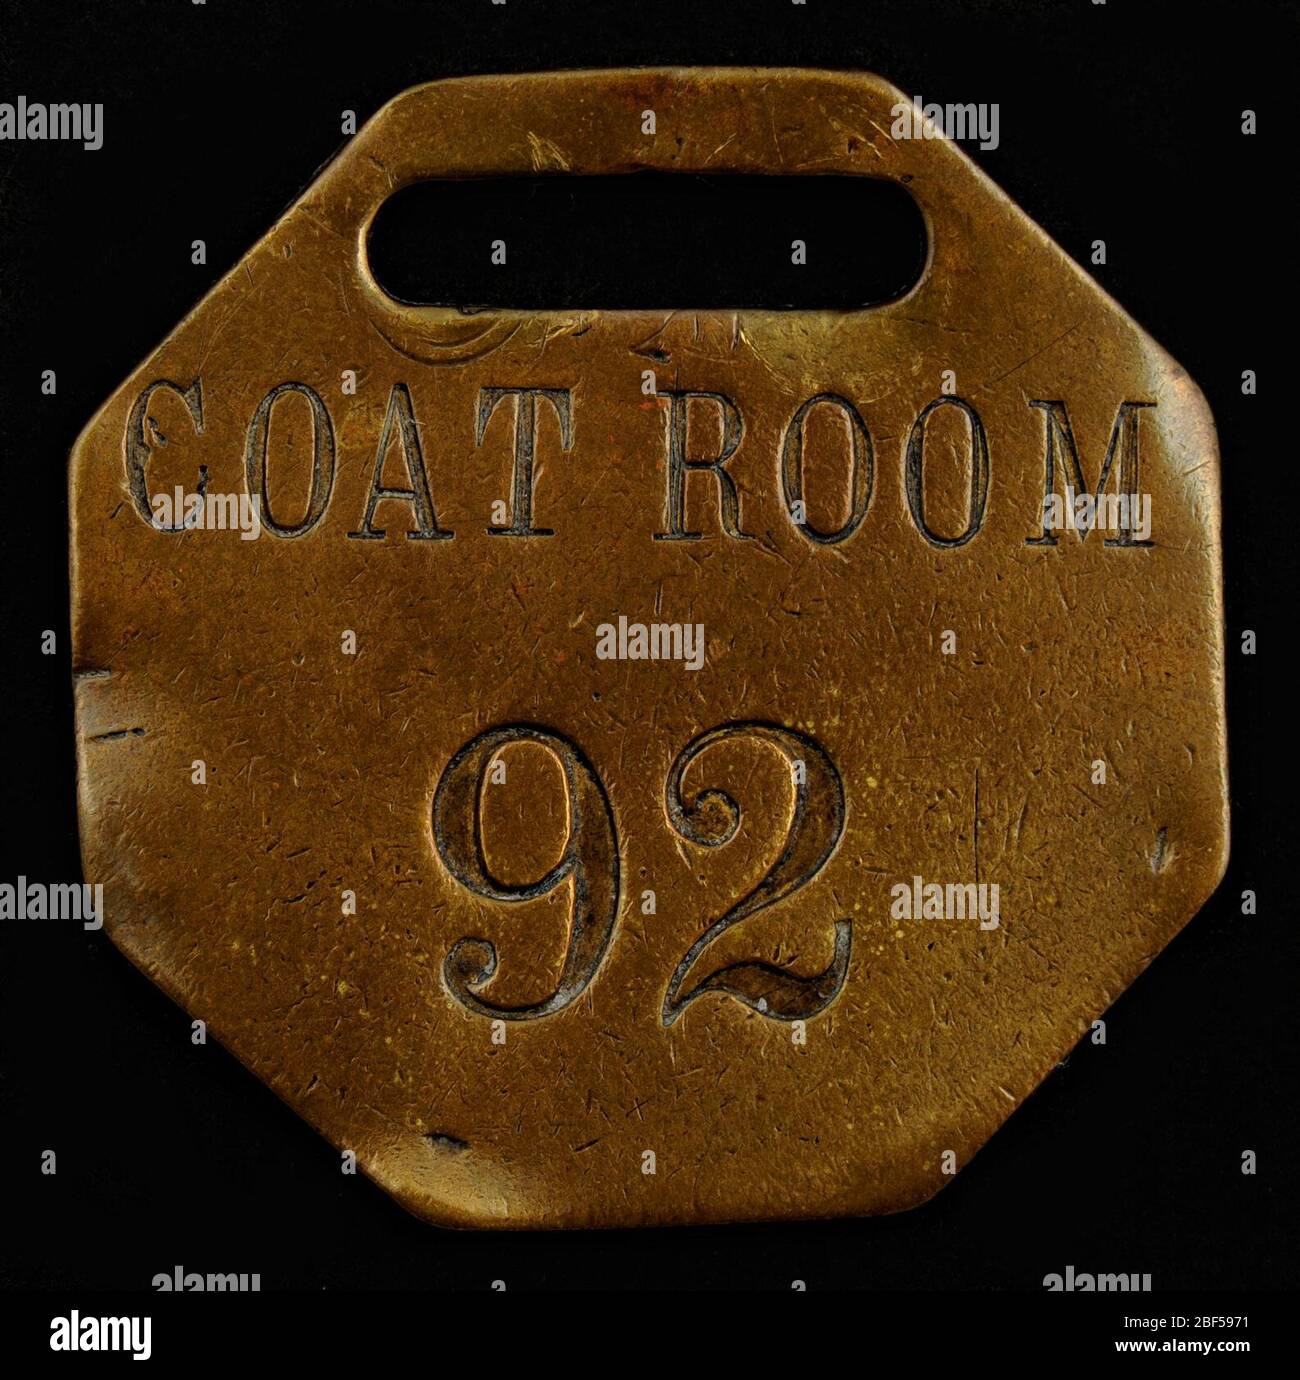 Coat Room Owney tag. The locations of some of the tags Owney received on his journeys are impossible to track down. This octagonal metal tag is marked simply “COATROOM 92” and offers no clues to its origin. Stock Photo